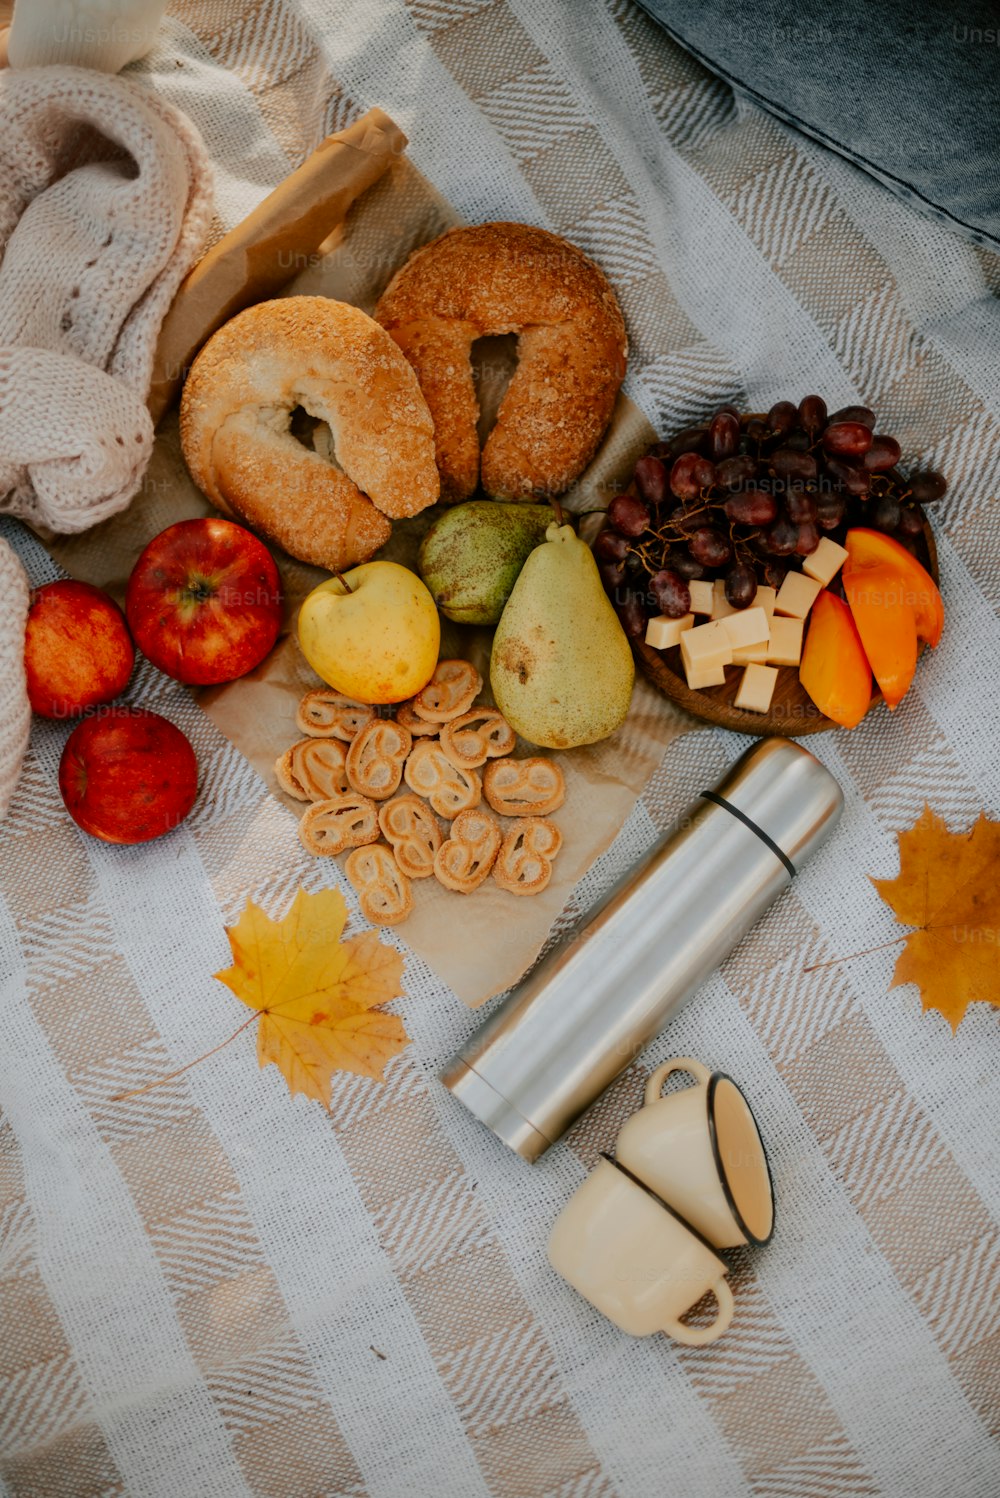 a table topped with donuts, apples, raisins and other foods